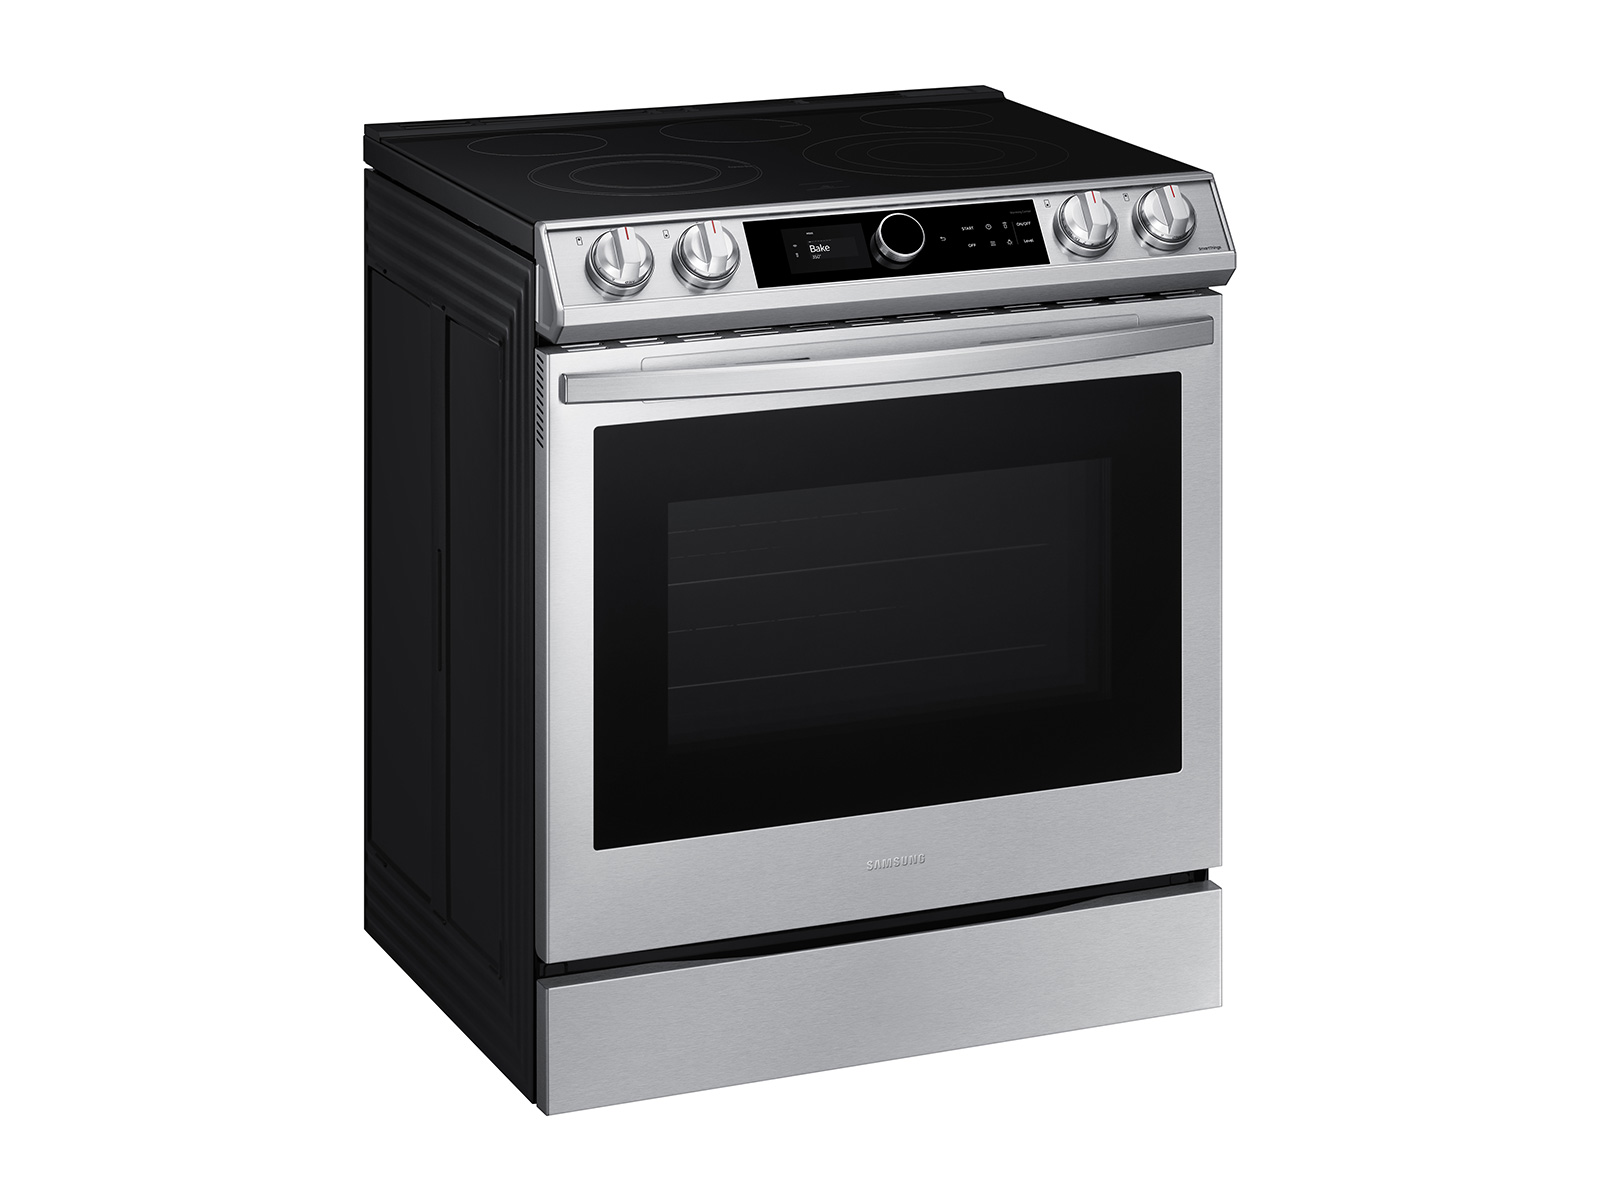 NE63T8711SG Samsung Appliances 6.3 cu ft. Smart Slide-in Electric Range  with Smart Dial & Air Fry in Black Stainless Steel